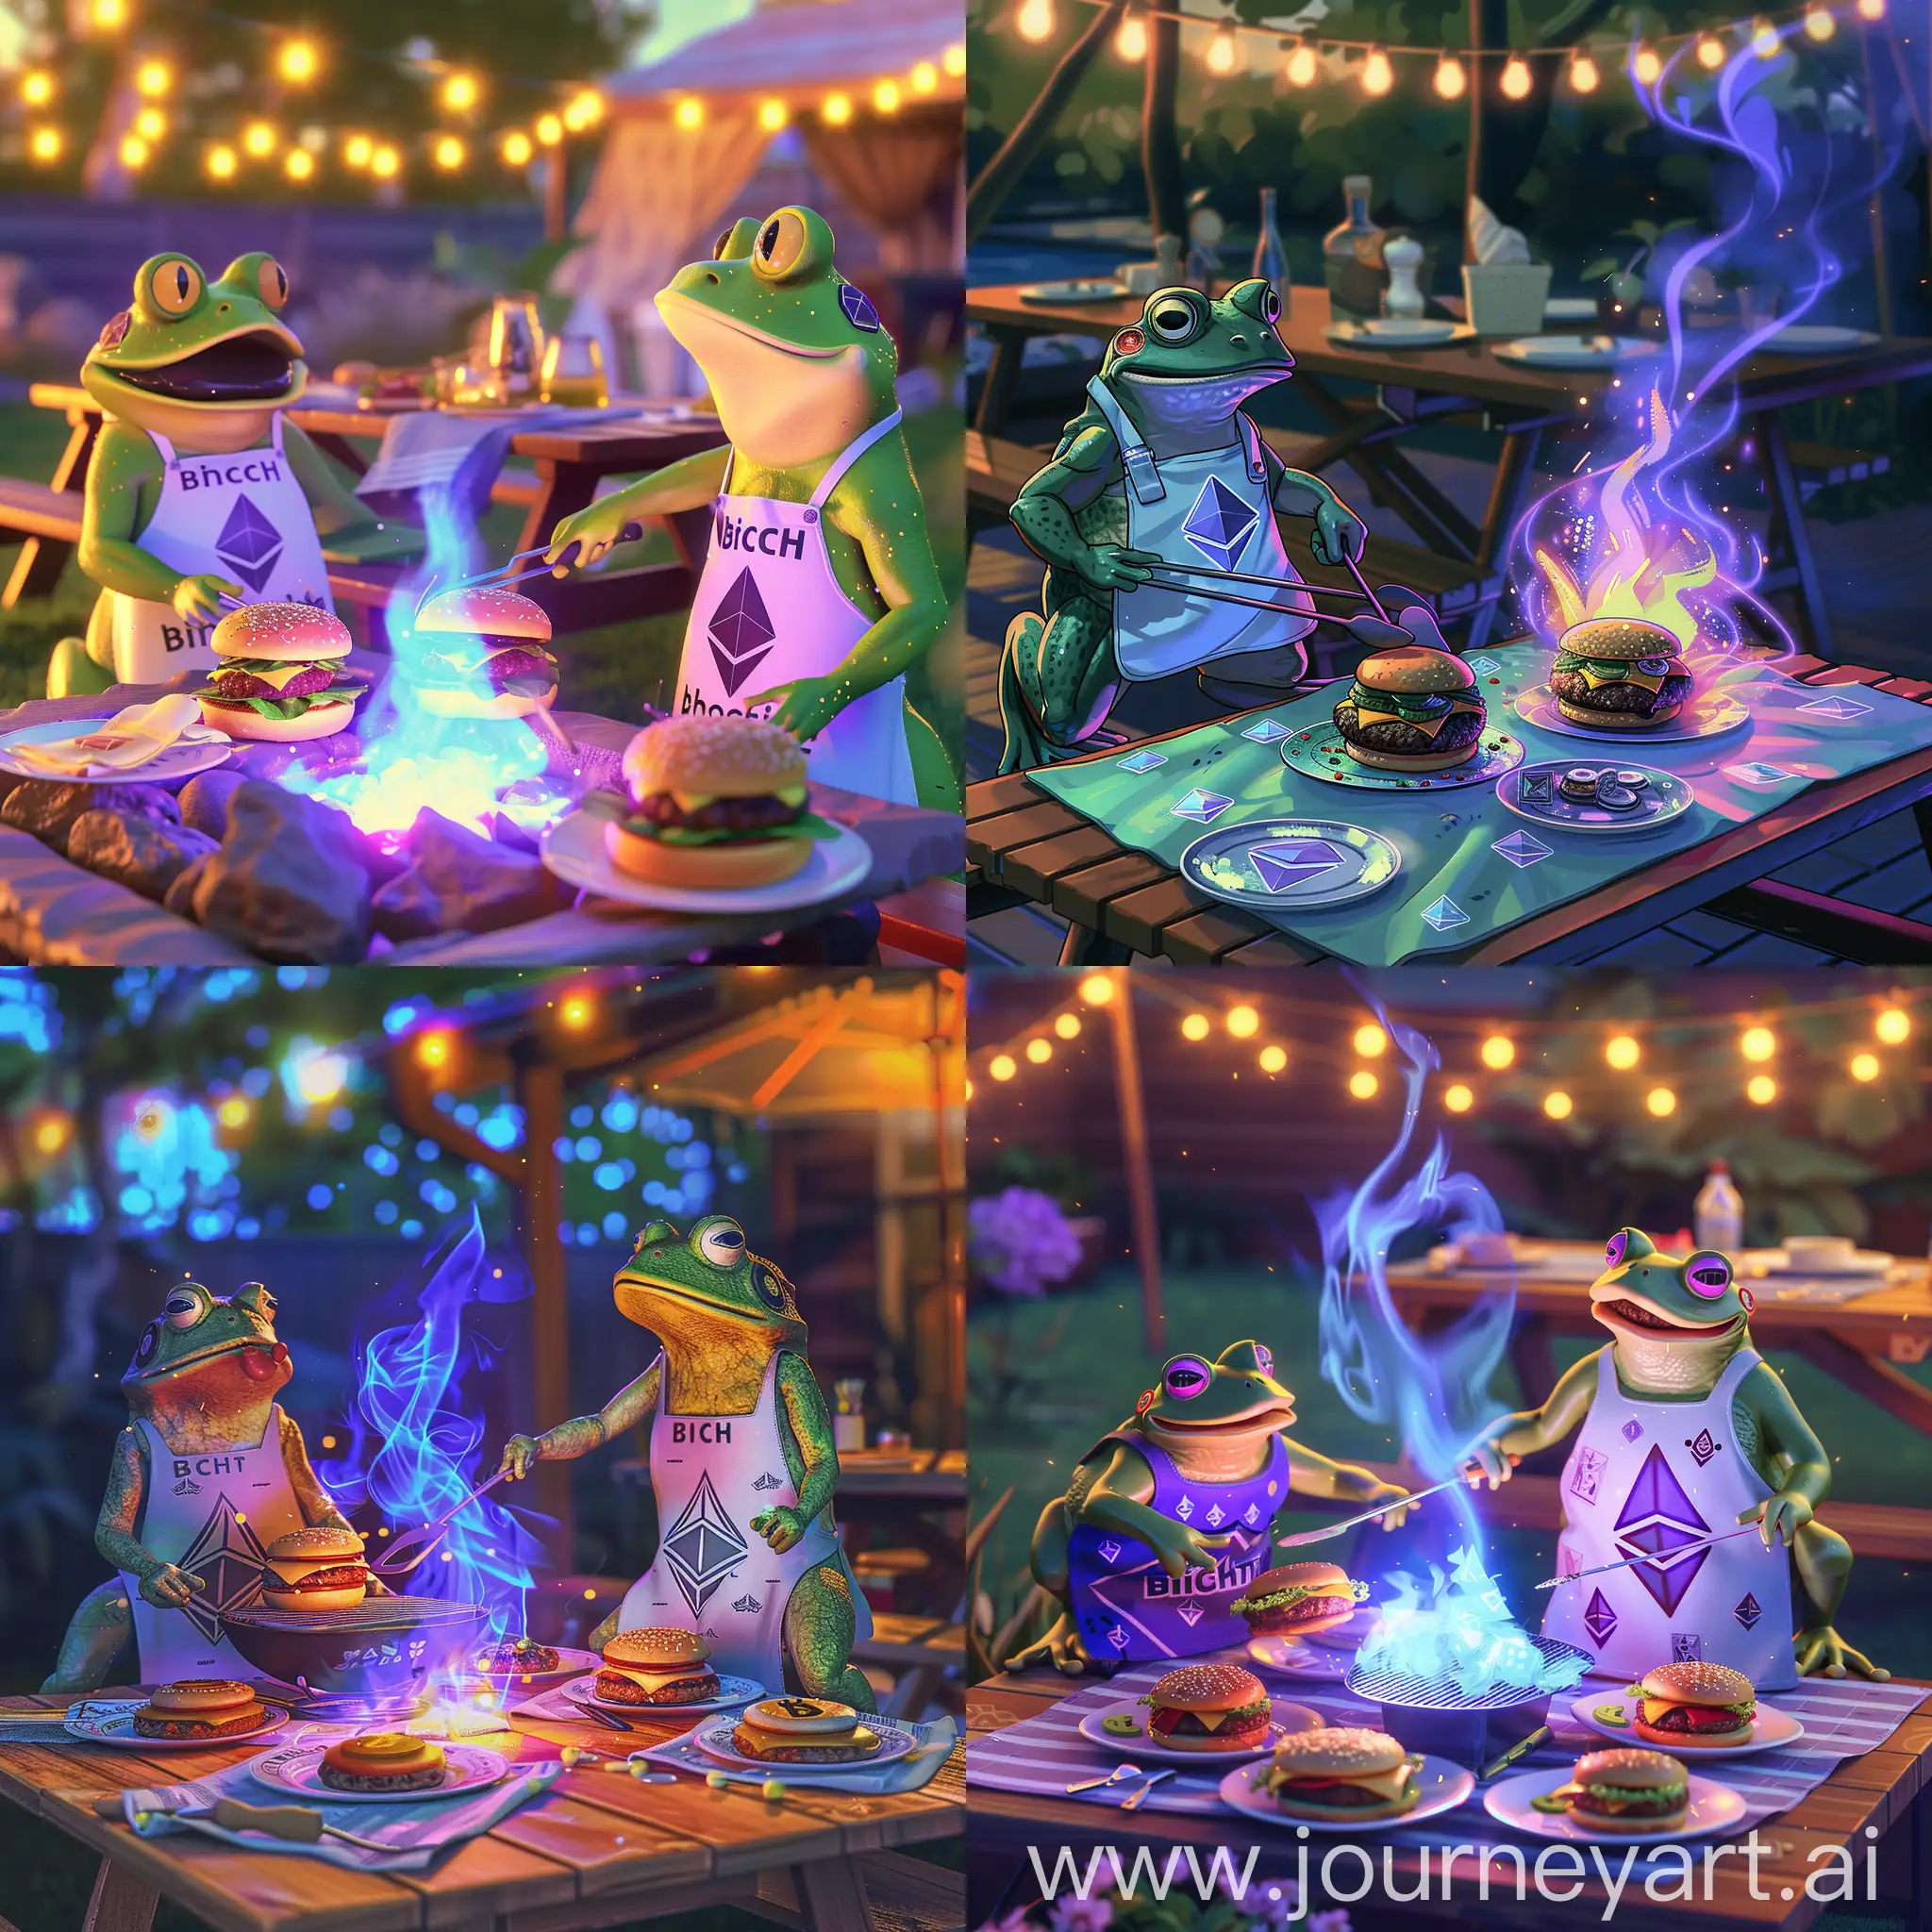  An outdoor Ethereum-themed BBQ, with cartoon frogs grilling over a flame that flickers in shades of blue and purple, symbolizing blockchain technology. One frog wears a "Block Chef" apron, flipping burgers that have the Ethereum symbol seared on top. In the background, a picnic table is set with plates and napkins featuring cryptocurrency motifs, under string lights that illuminate the scene at dusk. Created Using: vibrant color palette, outdoor lighting, blockchain flame effects, Ethereum branding on food, picnic aesthetic, digital and natural blend, hd quality, natural look 